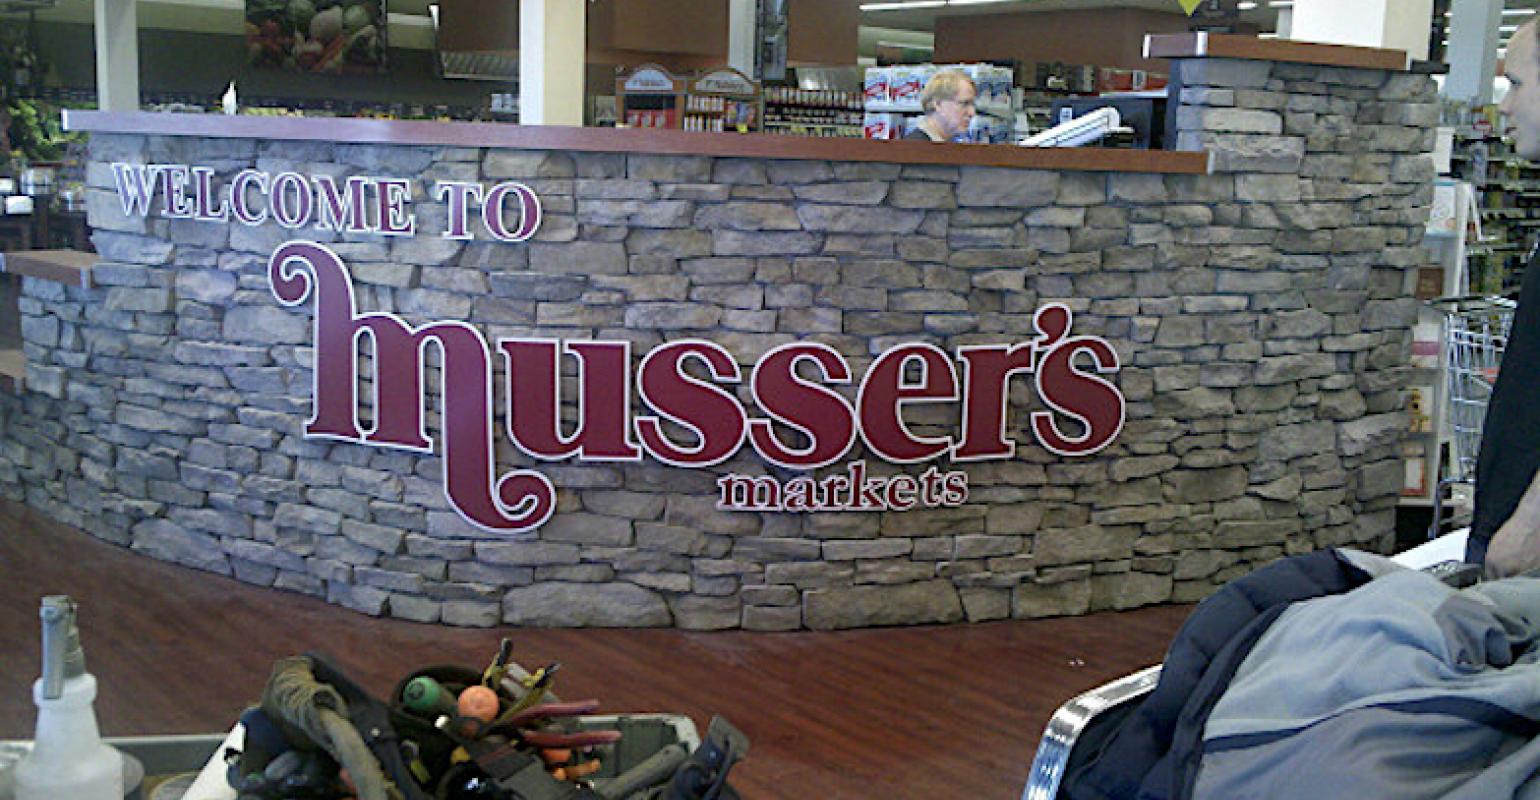 Giant Food Stores To Buy Musser S Markets Supermarket News